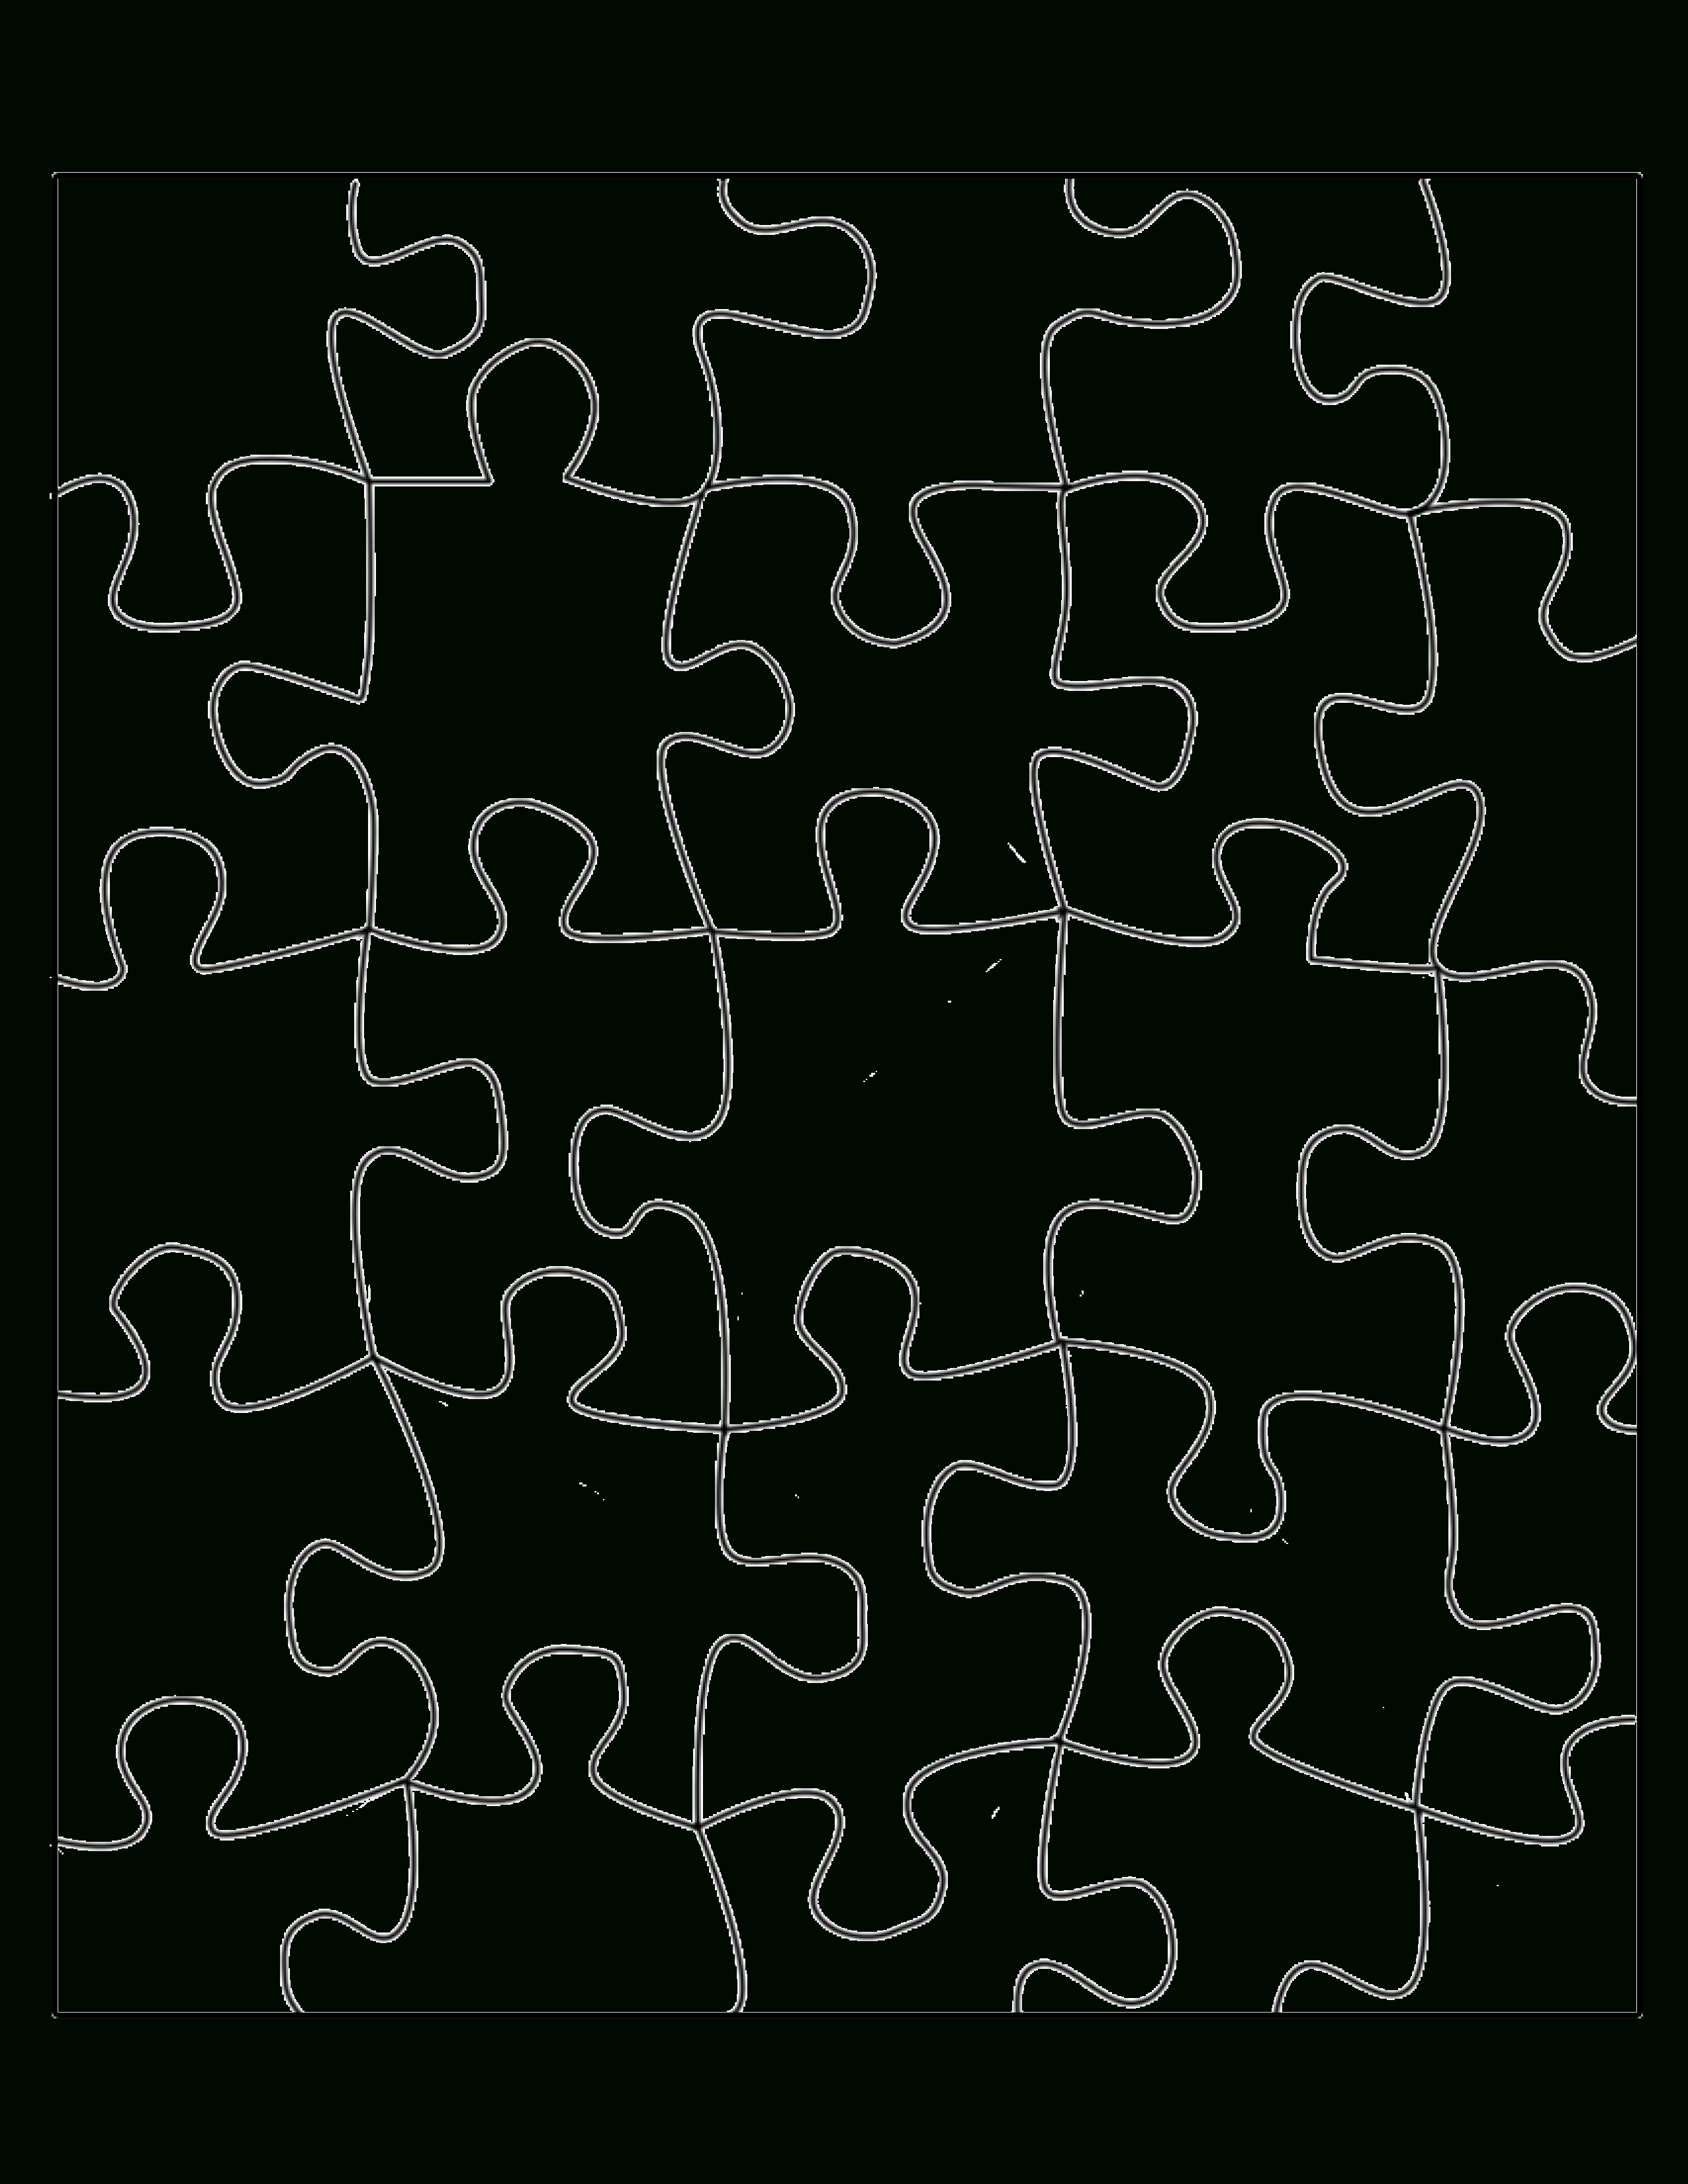 Printable Puzzle Pieces Template | Lovetoknow - Create A Printable Jigsaw Puzzle